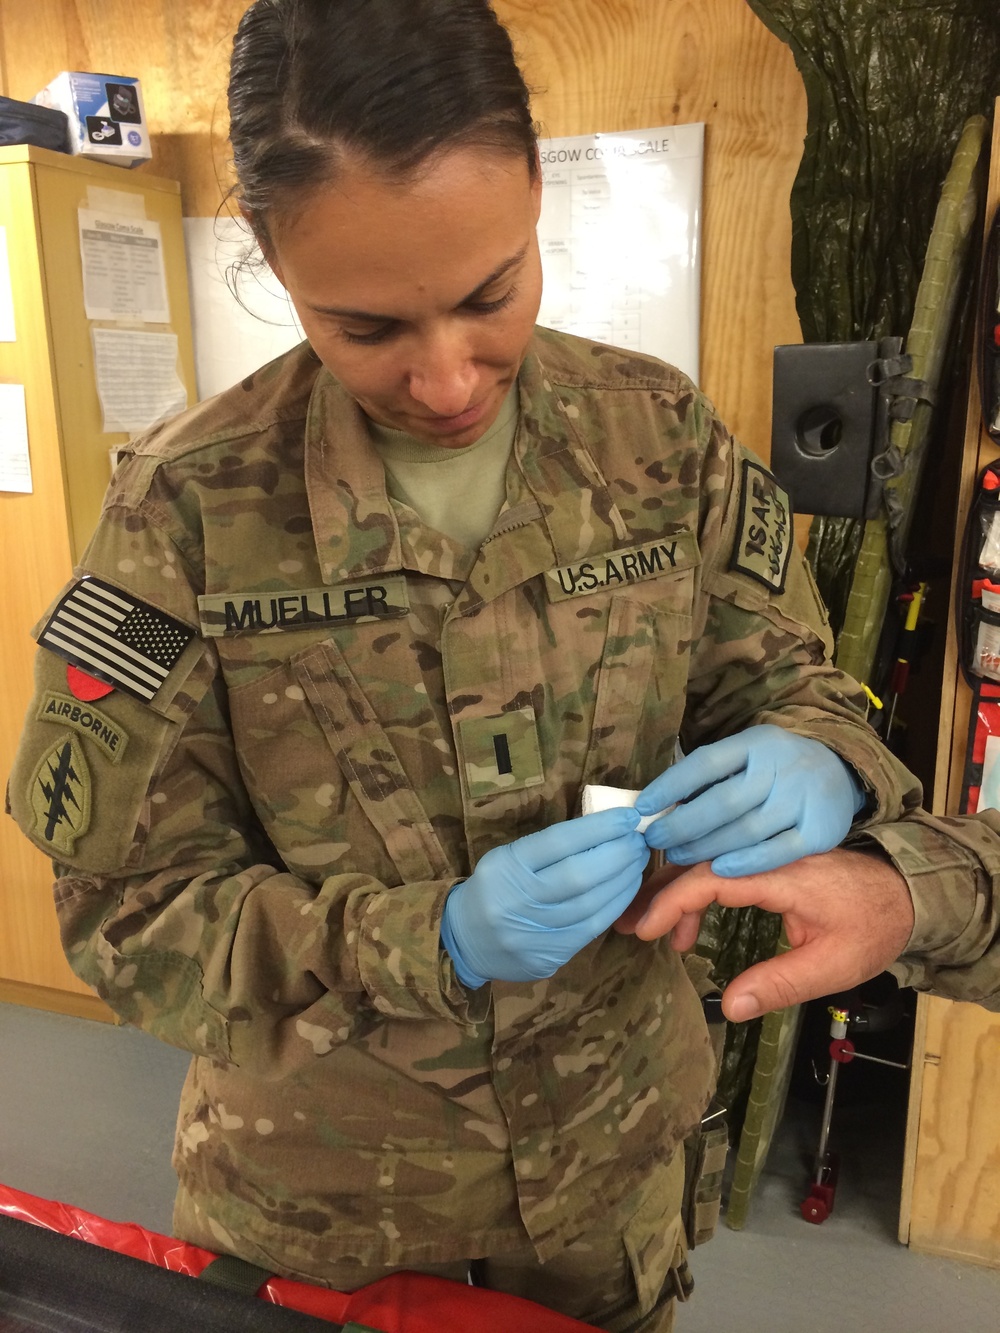 US Army physician assistant saves lives, builds bonds